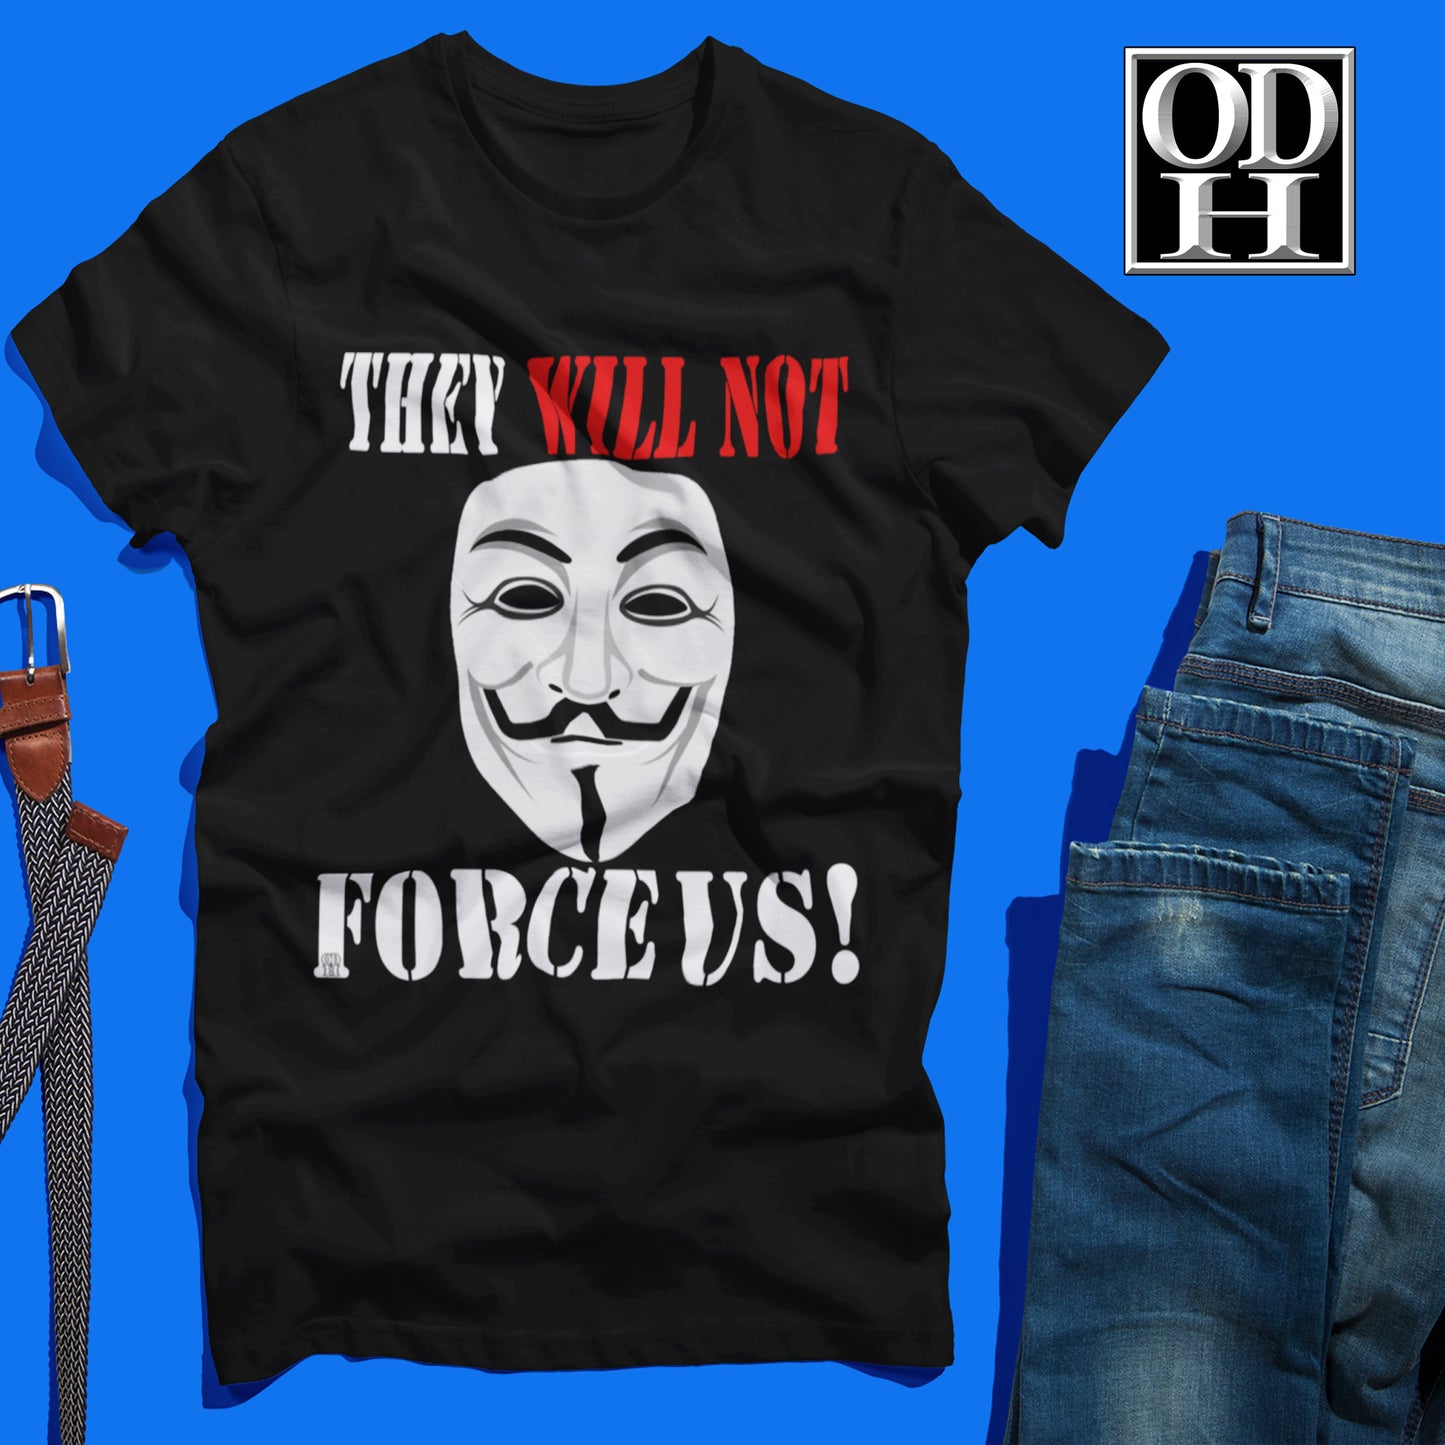 They Will Not Force Us T Shirt Short Sleeve Graphic Unisex Men's Women's Tops